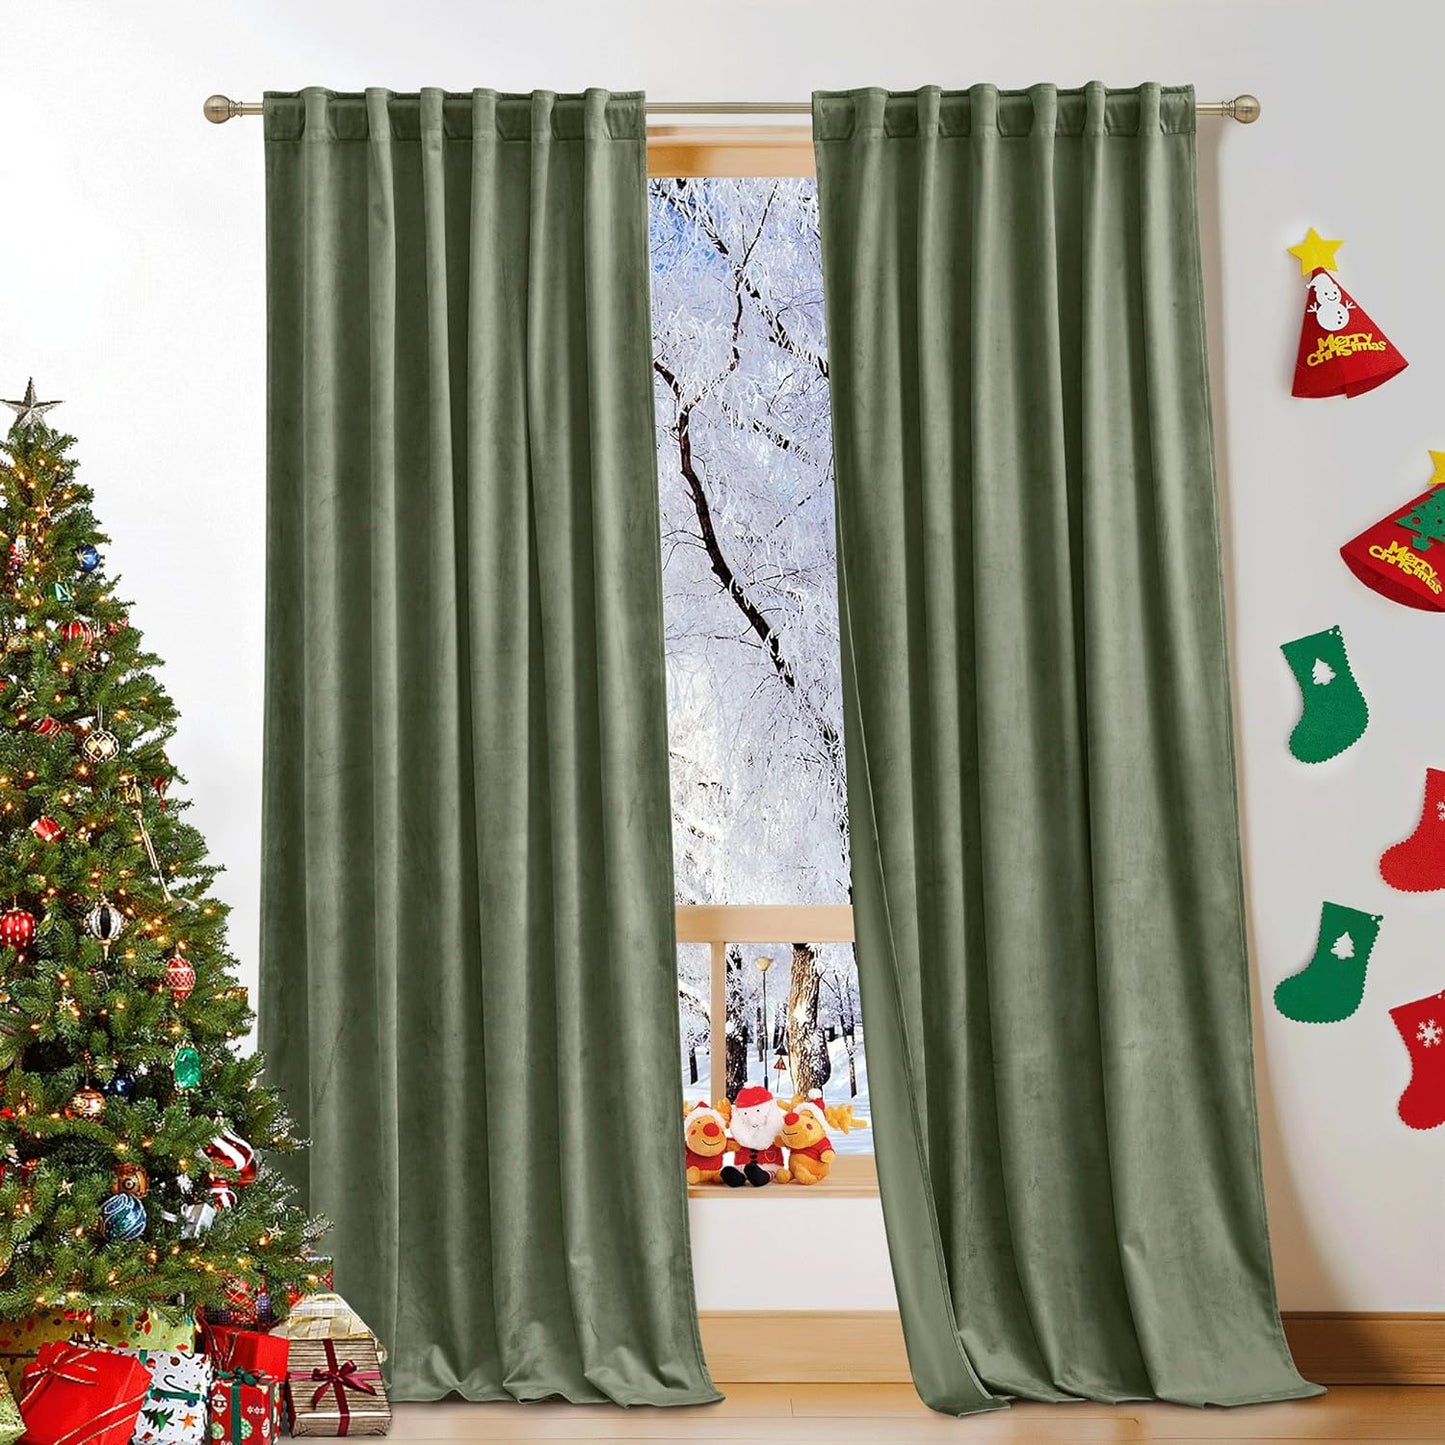 KGORGE Green Velvet Curtains 84 Inches Super Soft Room Darkening Thermal Insulating Window Curtains & Drapes for Bedroom Living Room Backdrop Holiday Christmas Decor, Hunter Green, W 52 X L 84, 2 Pcs  KGORGE Sage Green W 52 X L 96 